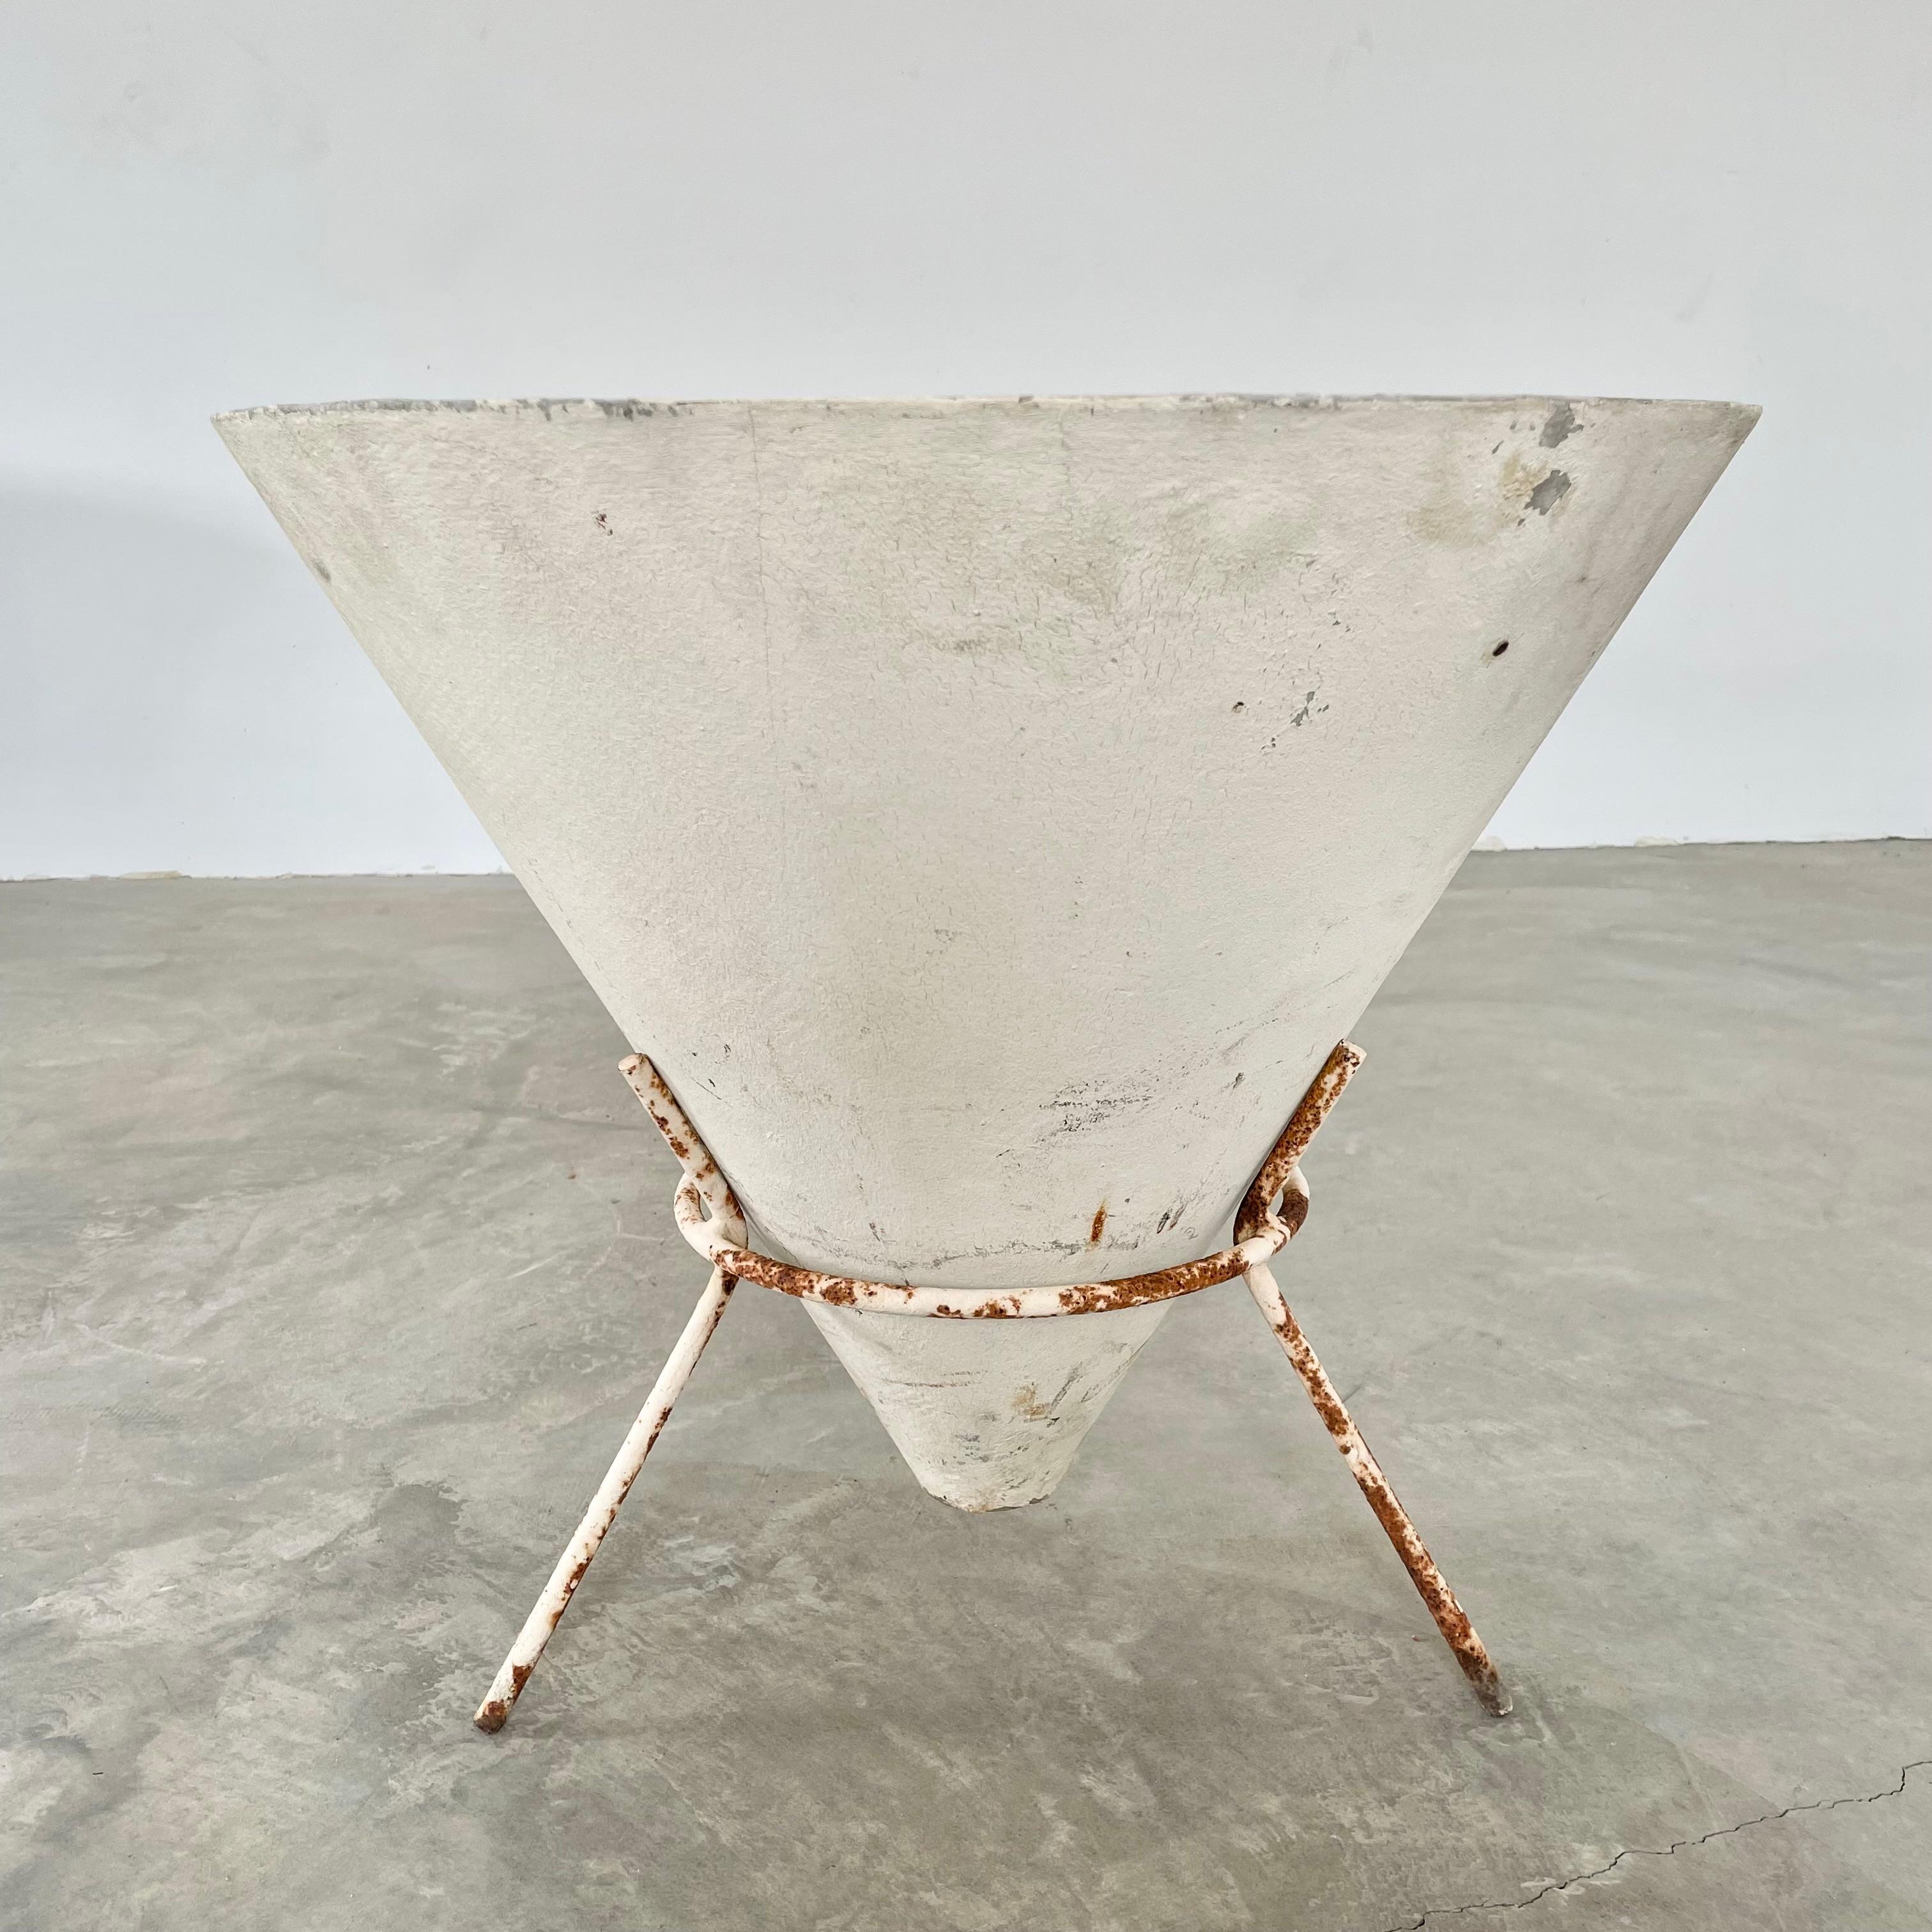 Cone planter by Willy Guhl made in the 1960s, in Switzerland. Inverted concrete cone sits comfortably in an iron tripod Stand. Great patina and coloring to planter. Bottom of cone floats a few inches off of the ground. 4 others with varying colors